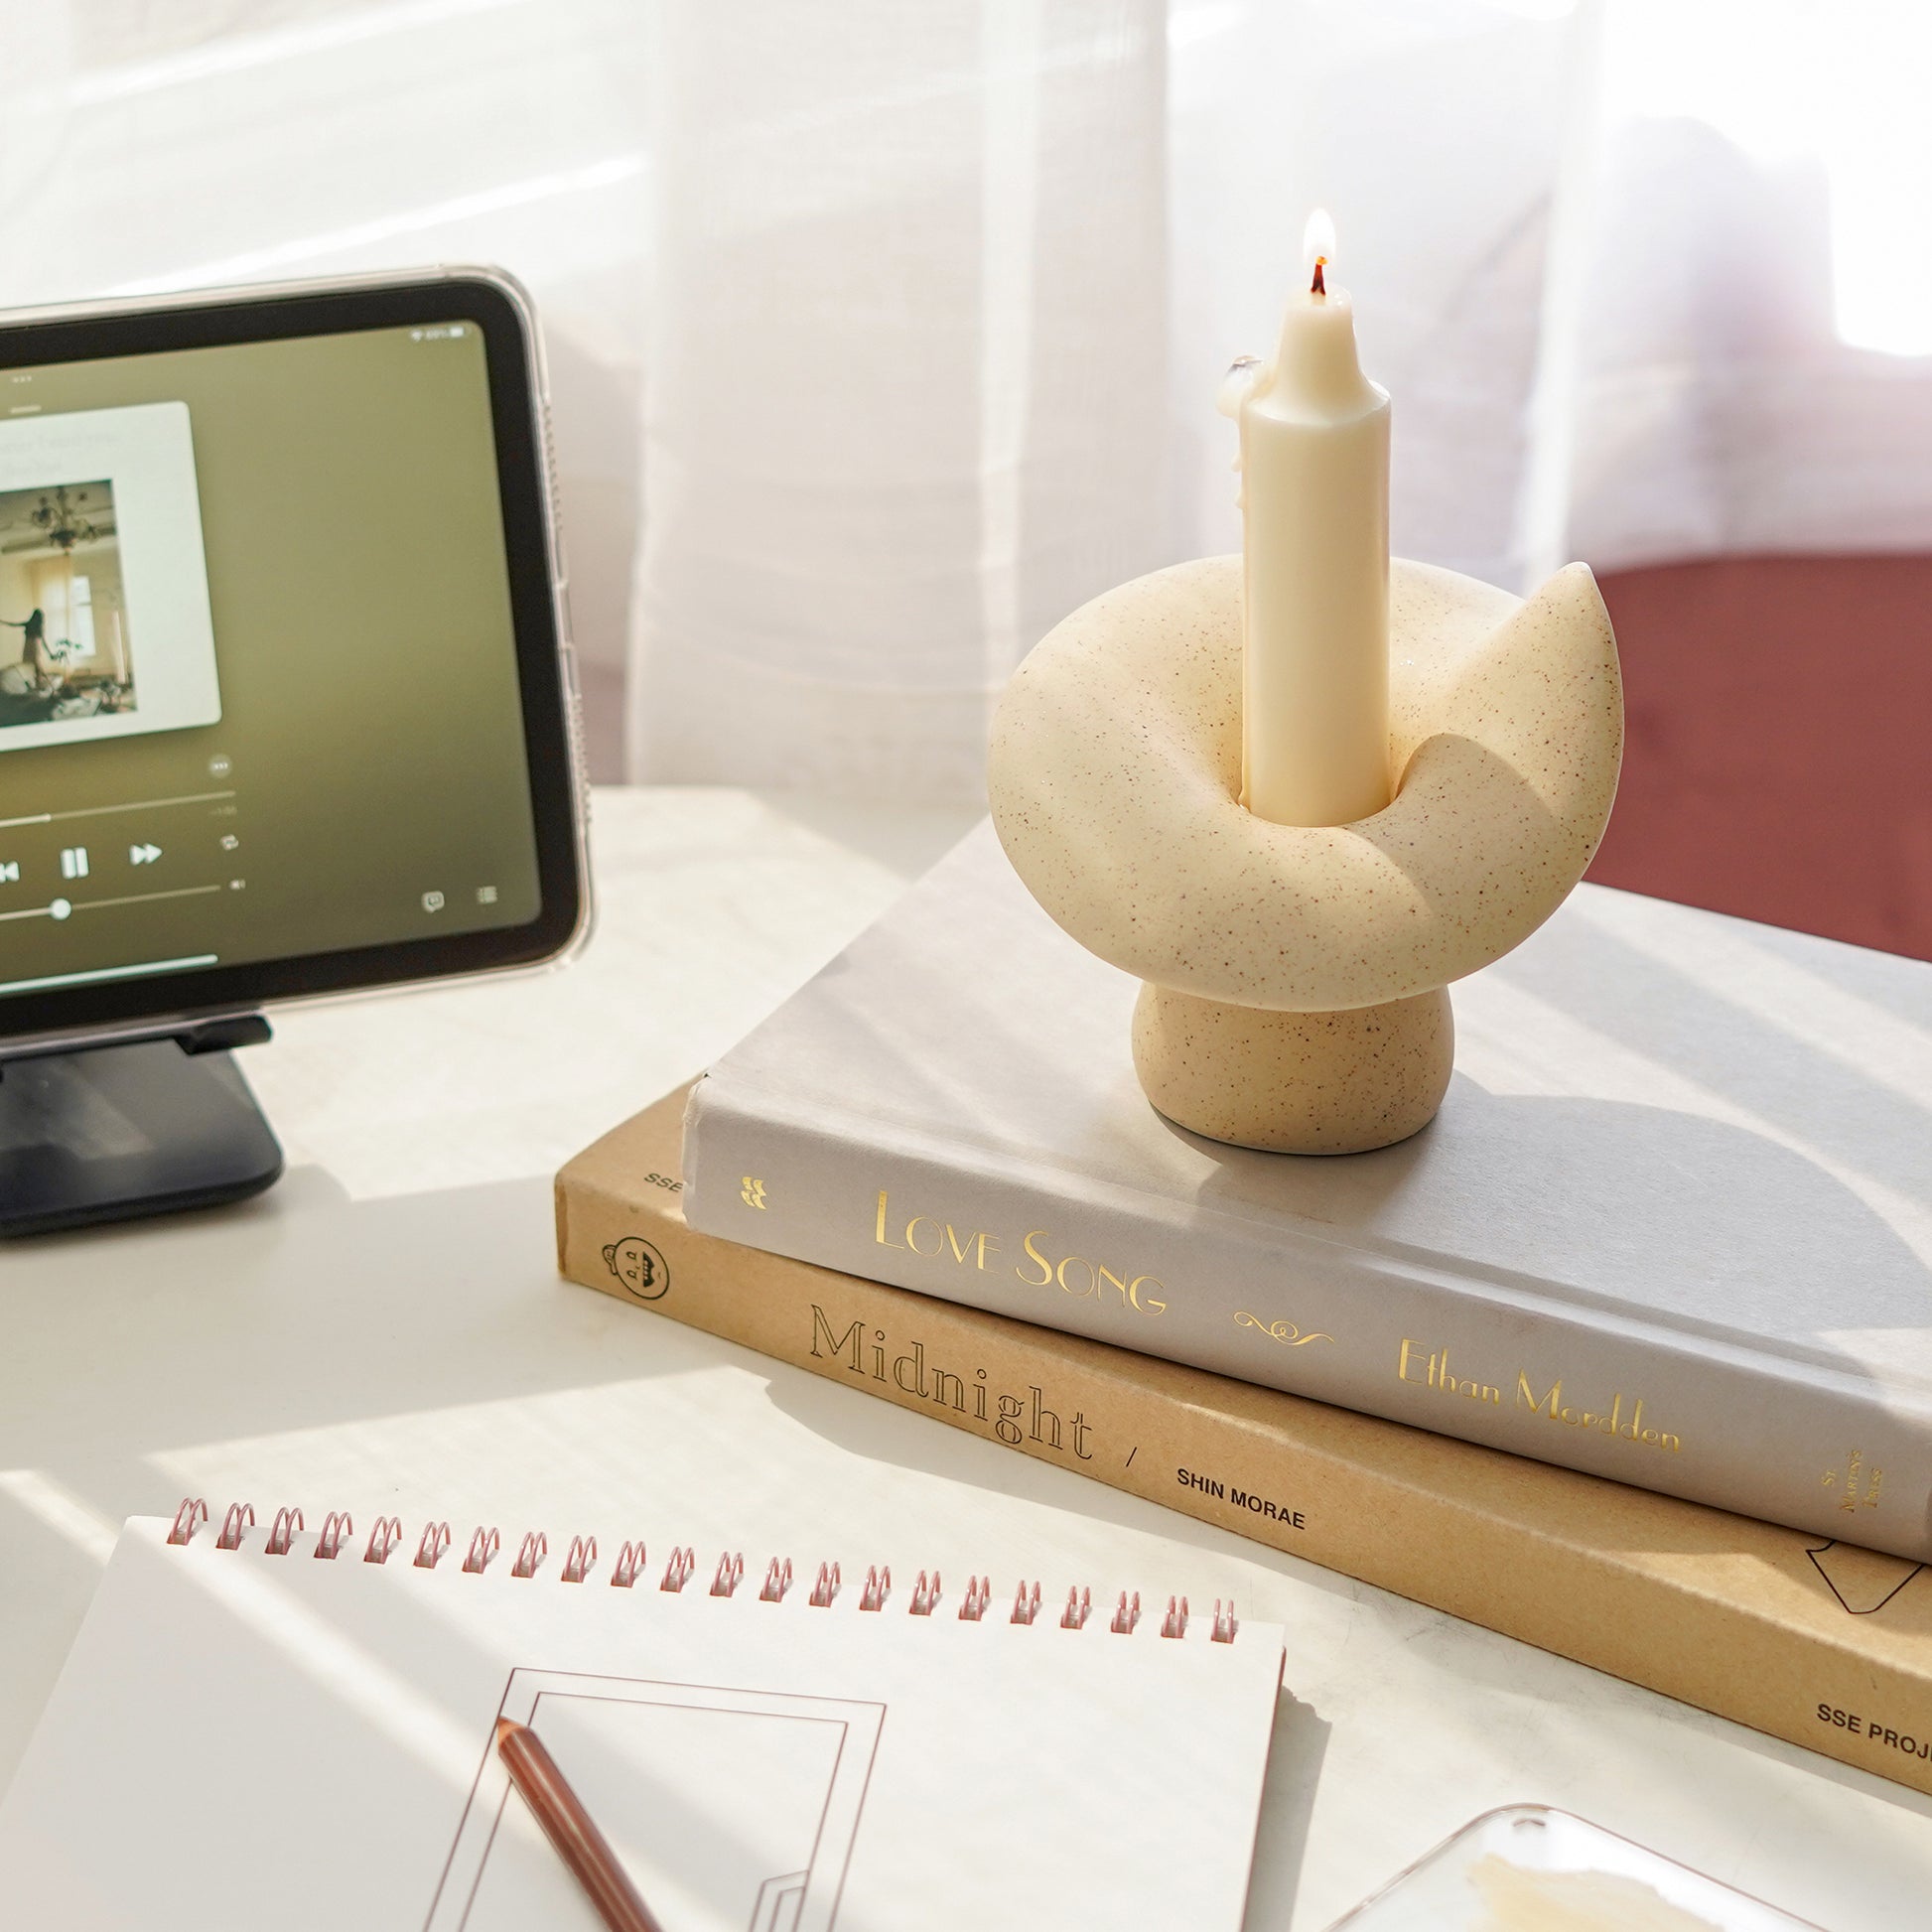 a lit crayon shape white soy pillar taper candle in a dotted beige ceramic mushroom candle holder placed on books love song and coloring book called midnight by shin morae, sketchbook, color pencil, and ipad mini playing music london by yerin baek